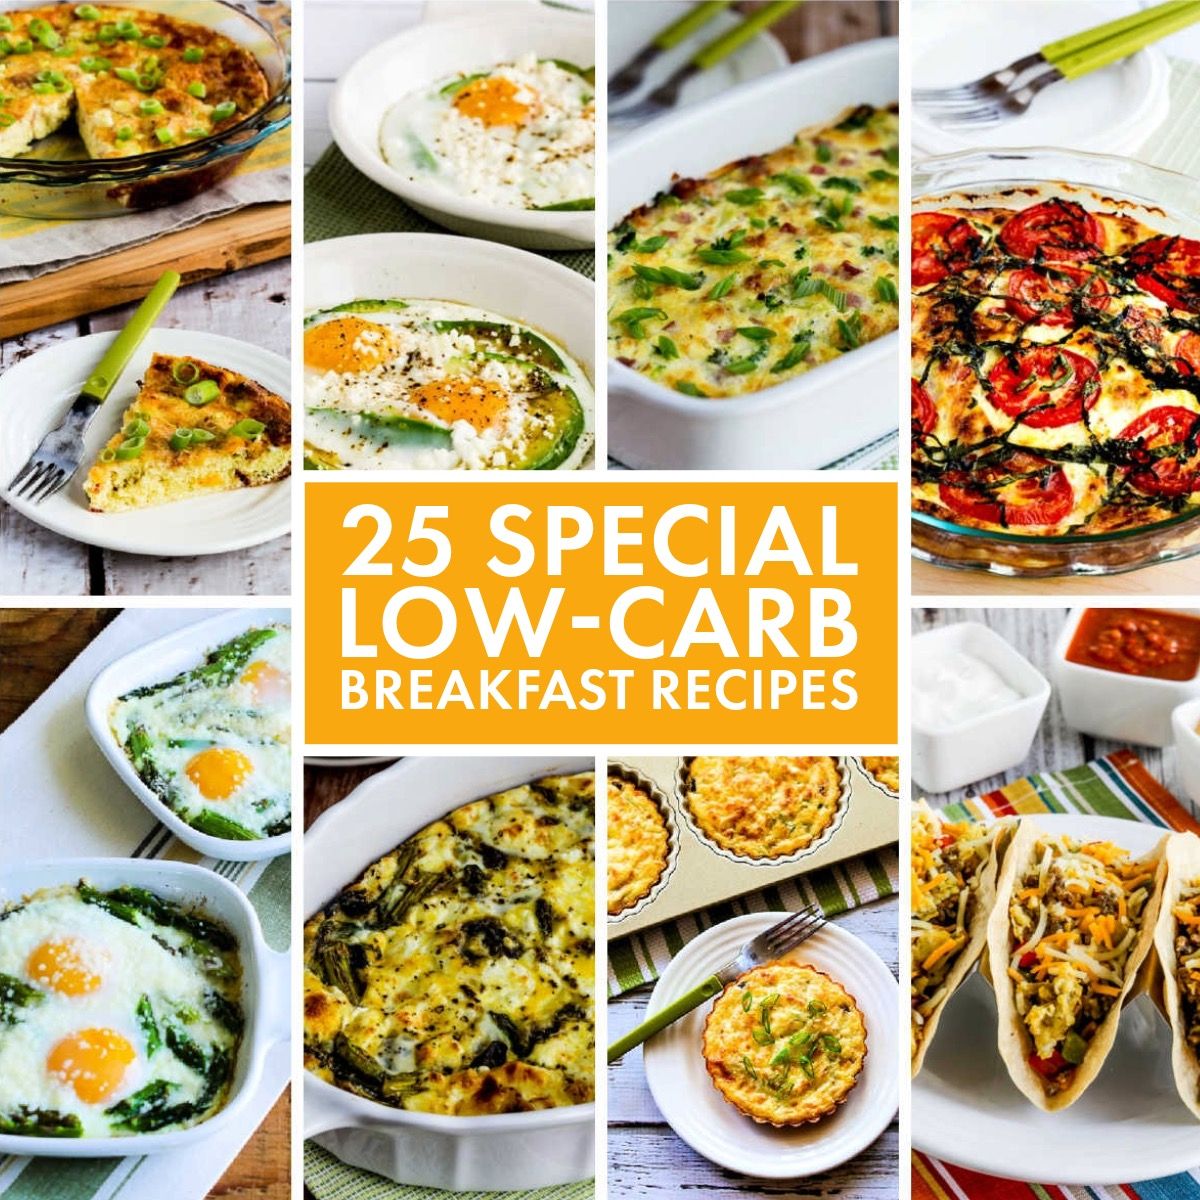 Text overlay Collage image for 25 Special Low-Carb Breakfast Recipes showing featured recipes.